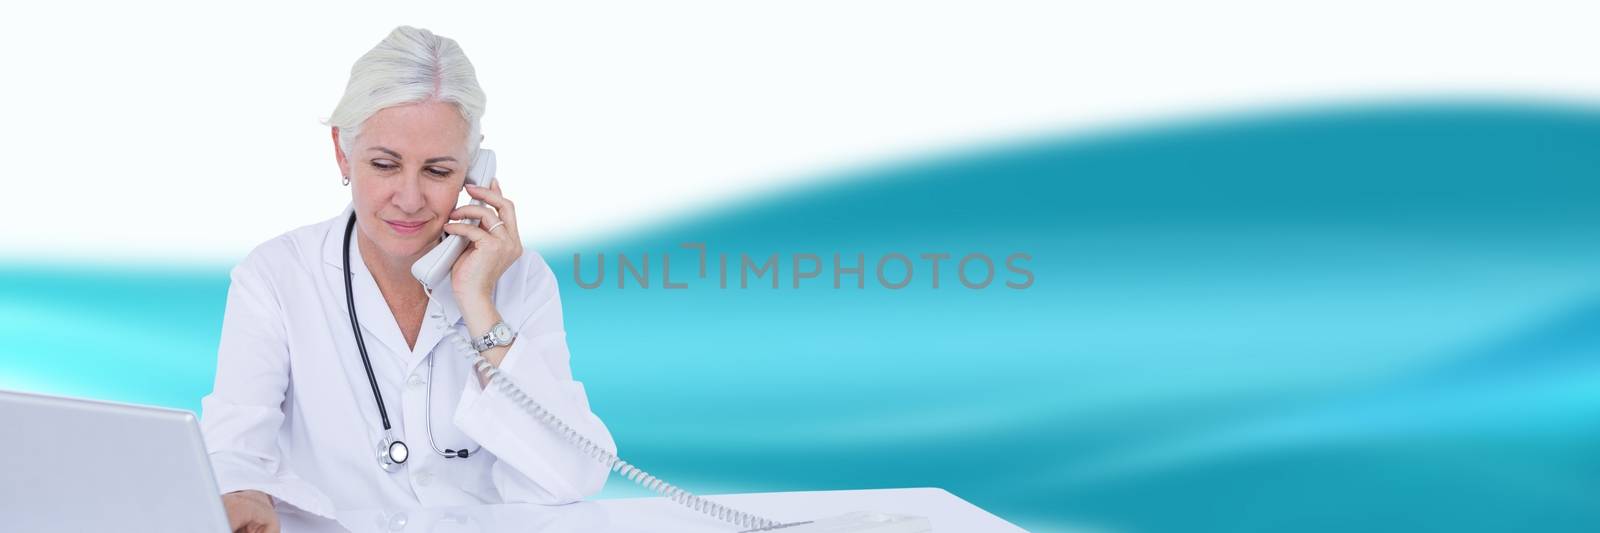 Doctor at desk on phone against blue and white blurred abstract background by Wavebreakmedia